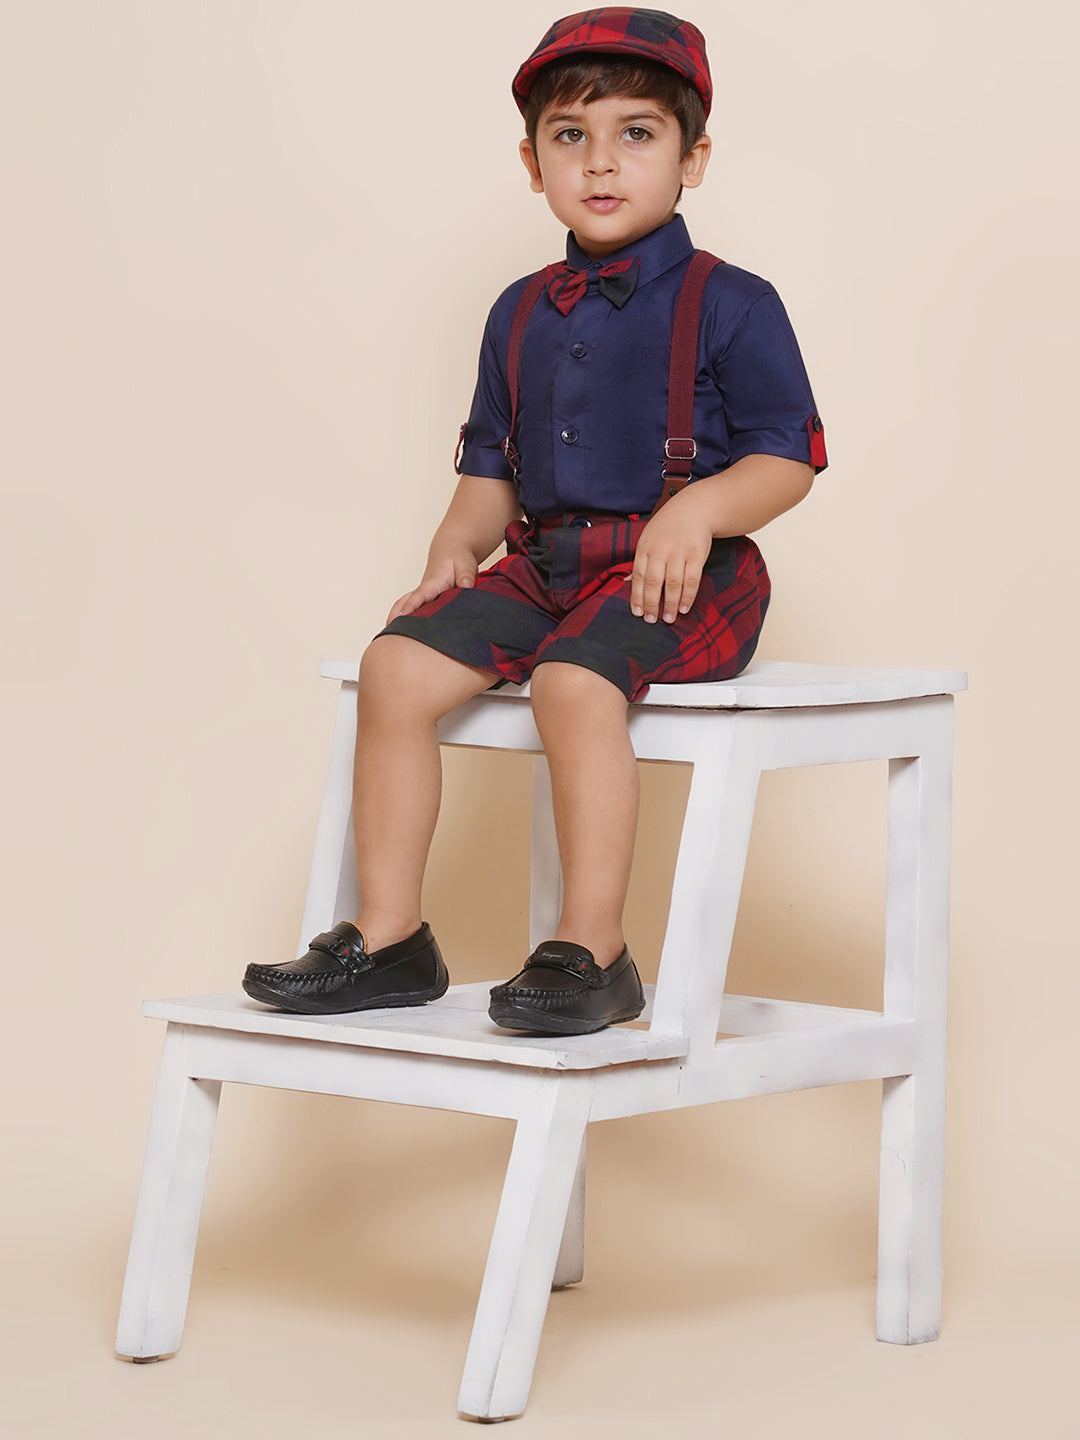 Boys Kids Red Cotton Printed Shirt Shorts With Cap and Suspender Set